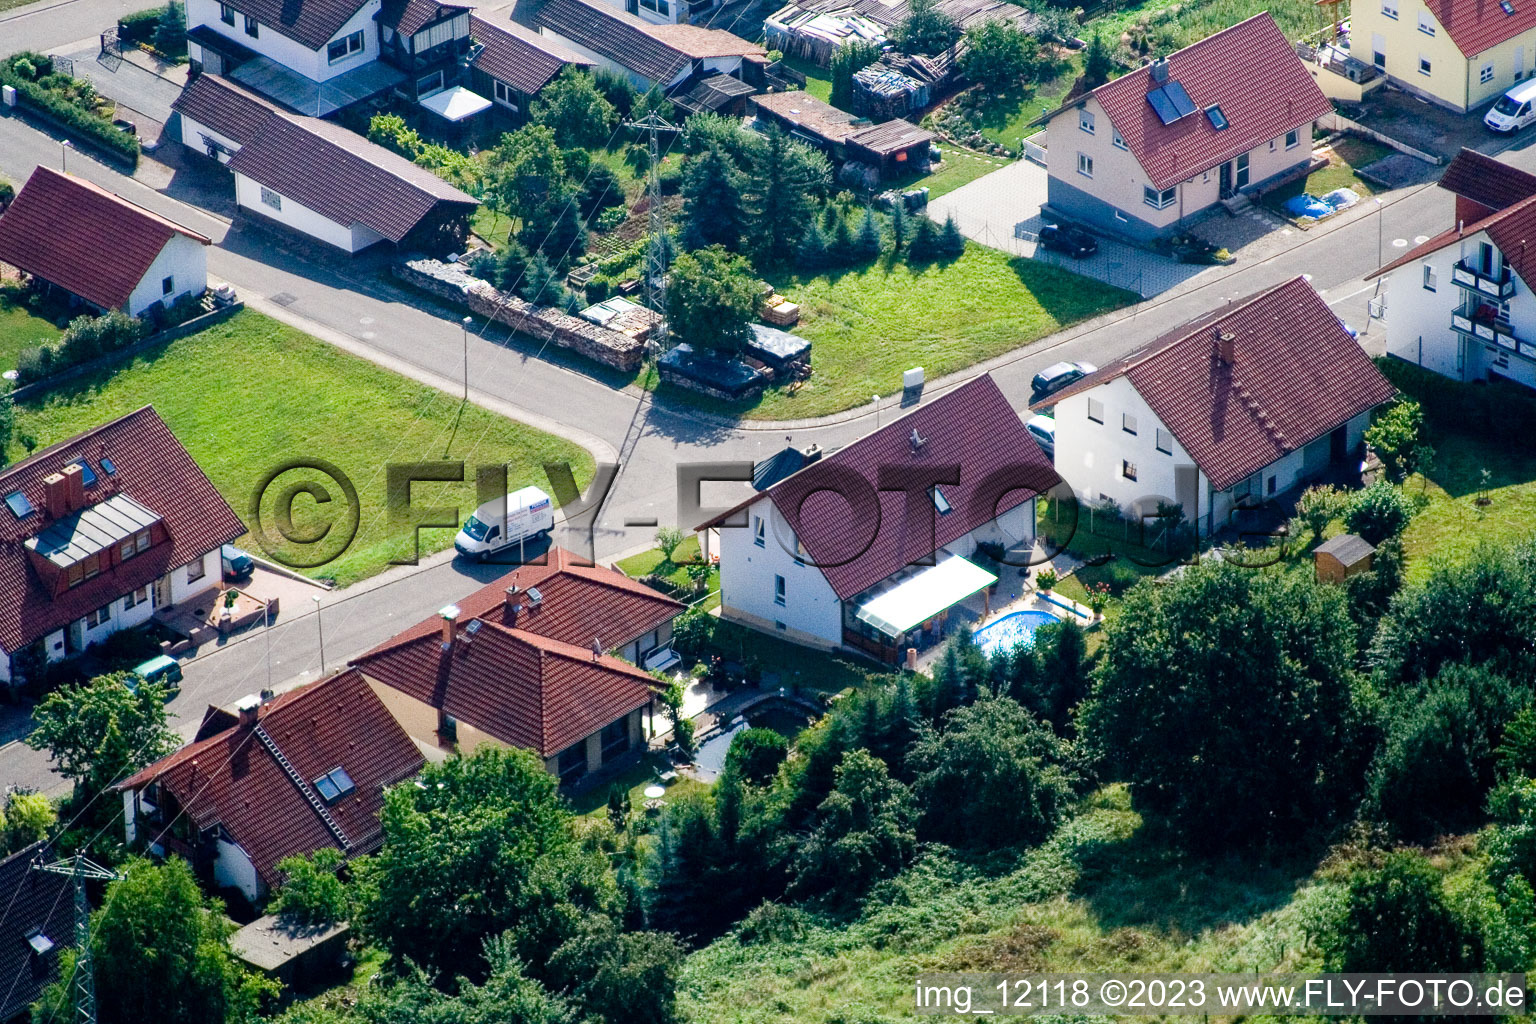 Aerial photograpy of Eußerthal in the state Rhineland-Palatinate, Germany